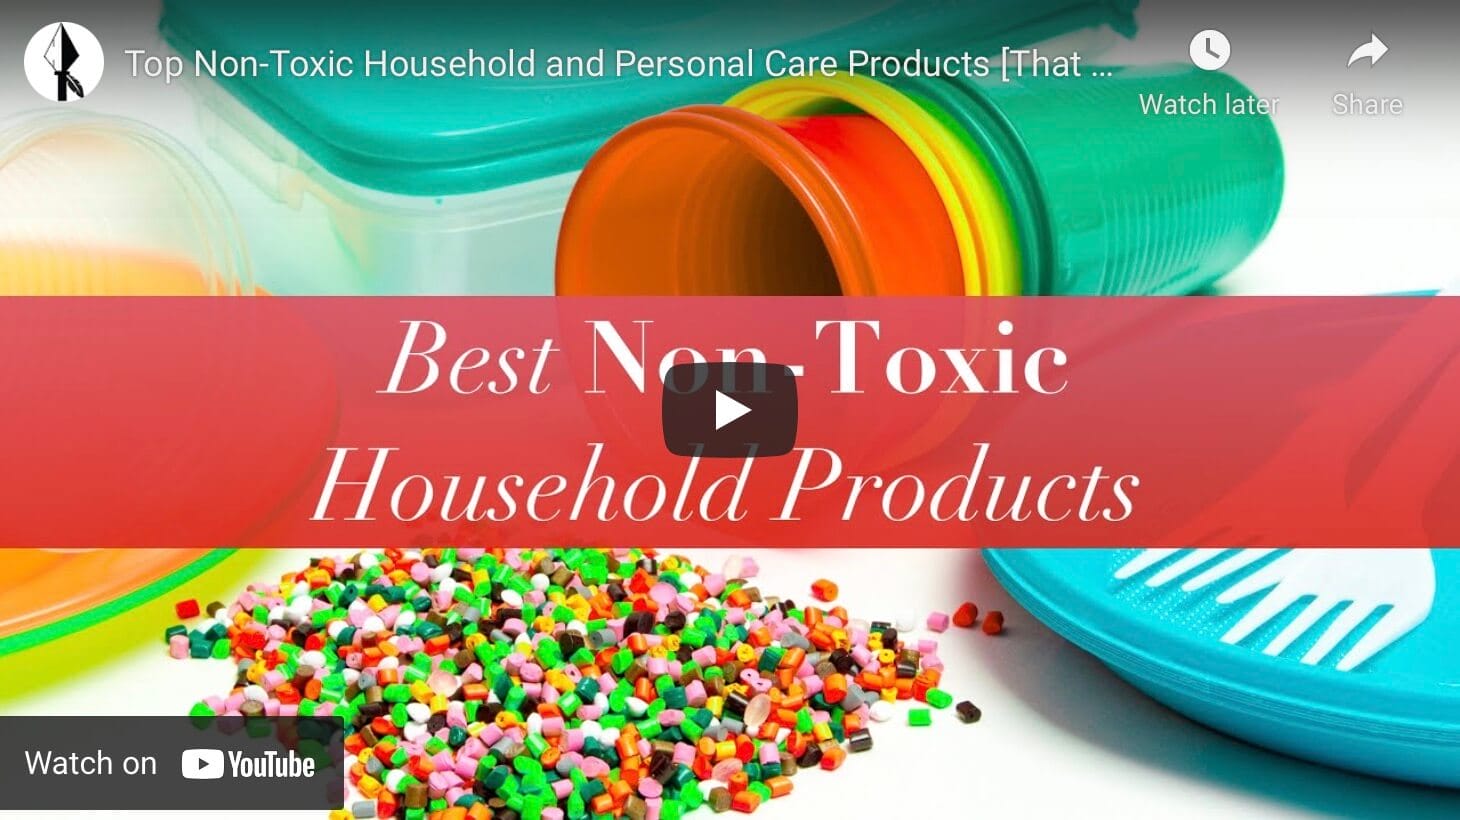 Graphic about non-toxic household products.